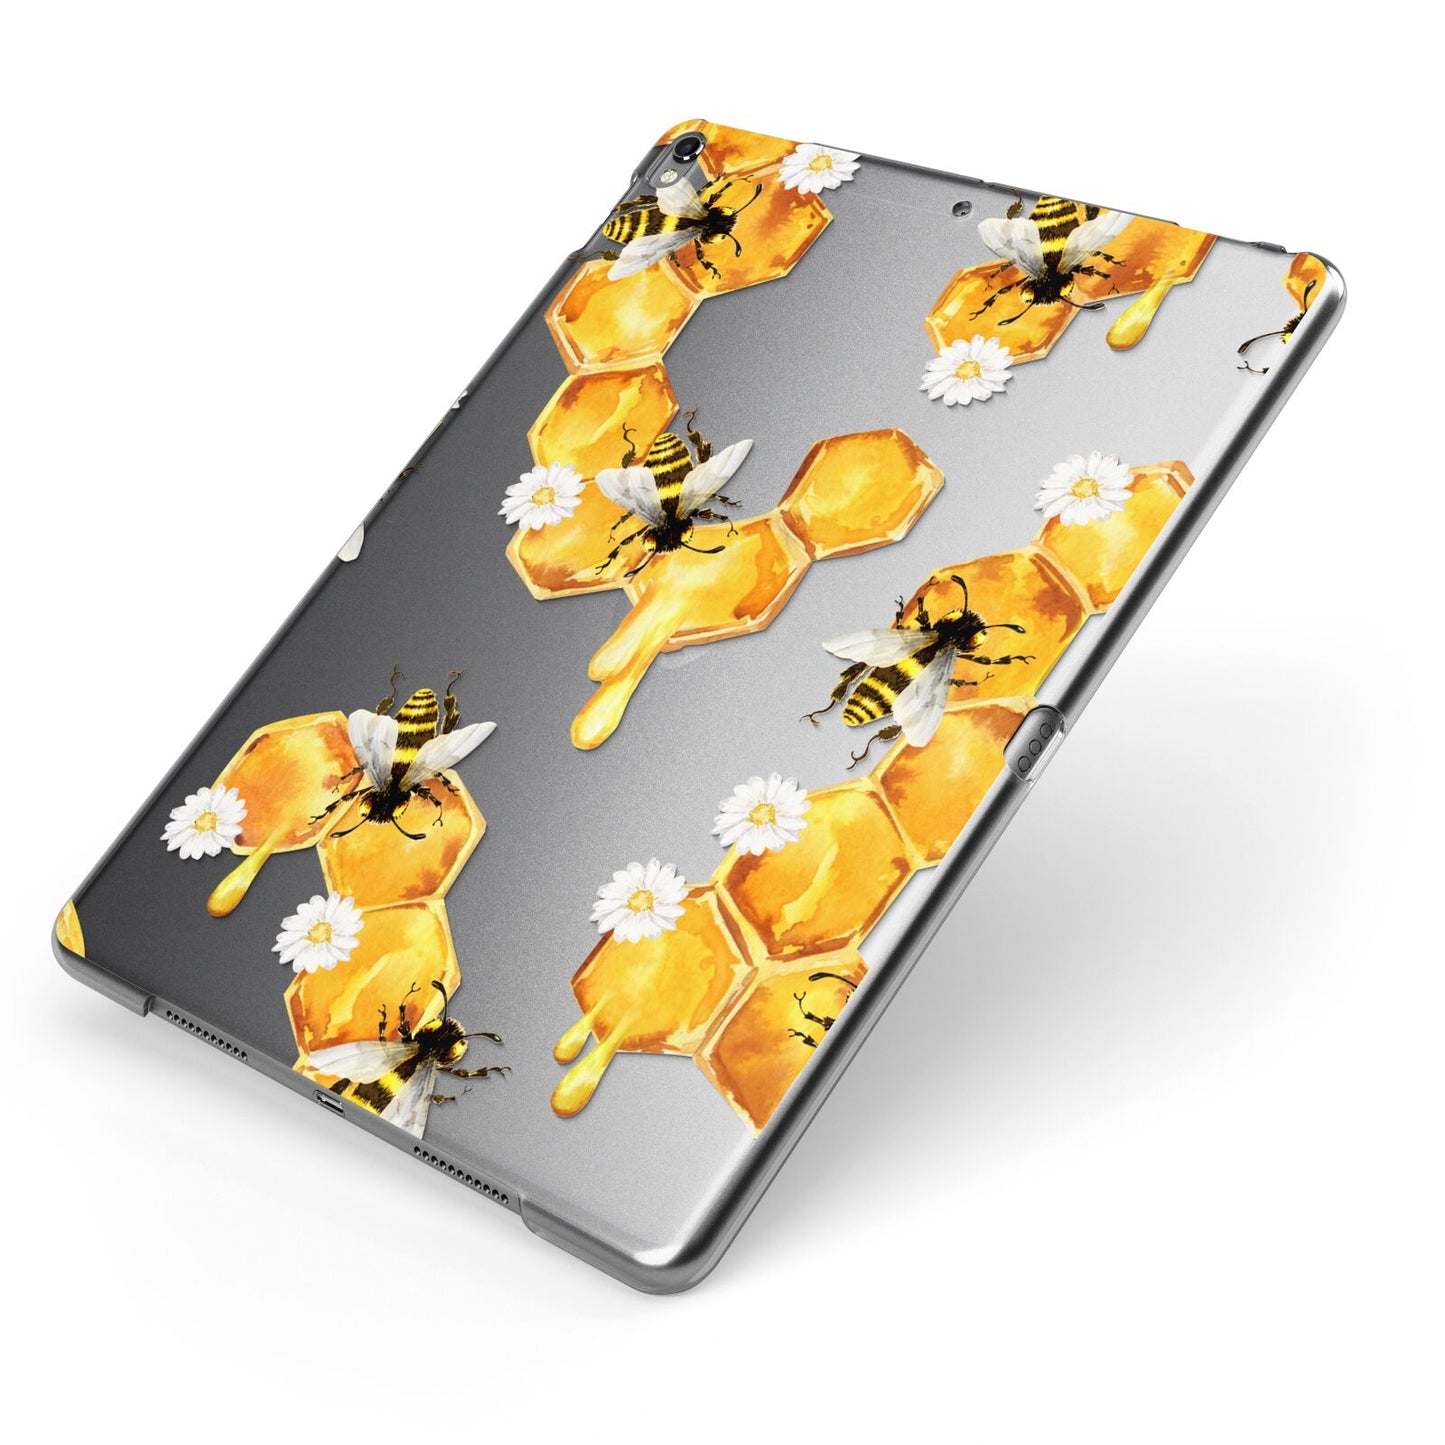 Honeycomb with Bees and Daisies Apple iPad Case on Grey iPad Side View